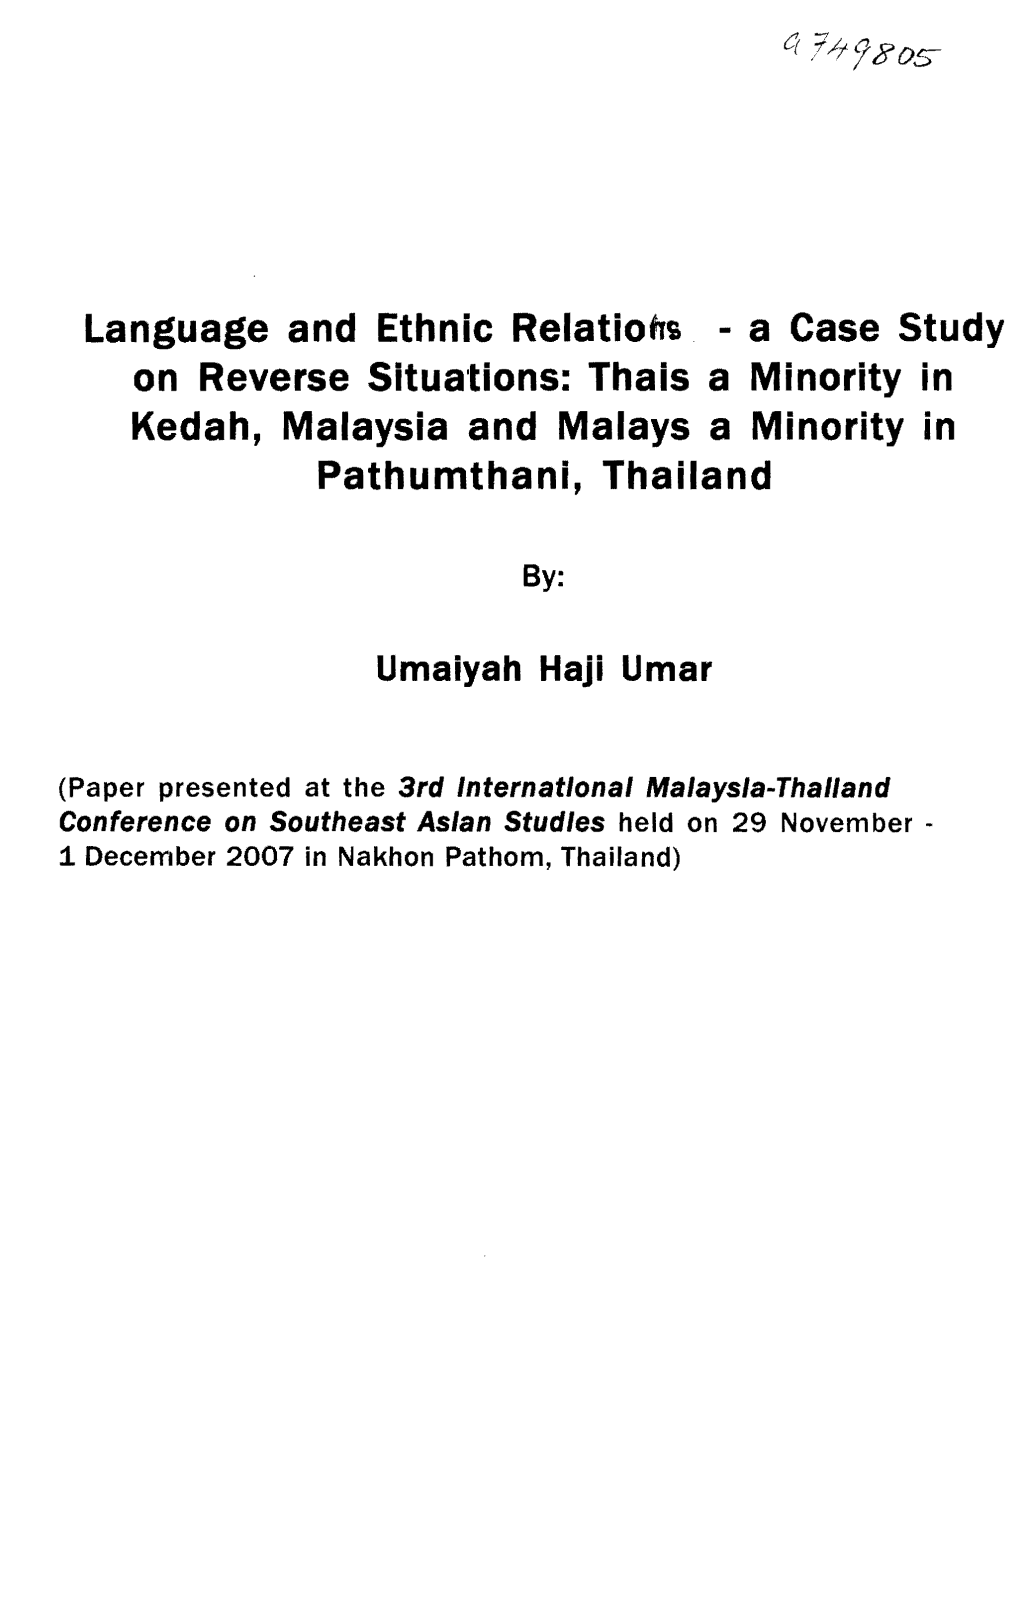 Language and Ethnic Relatiohi - a Case Study on Reverse Situations: Thais a Minority in Kedah, Malaysia and Malays a Minority in Pathumthani, Thailand